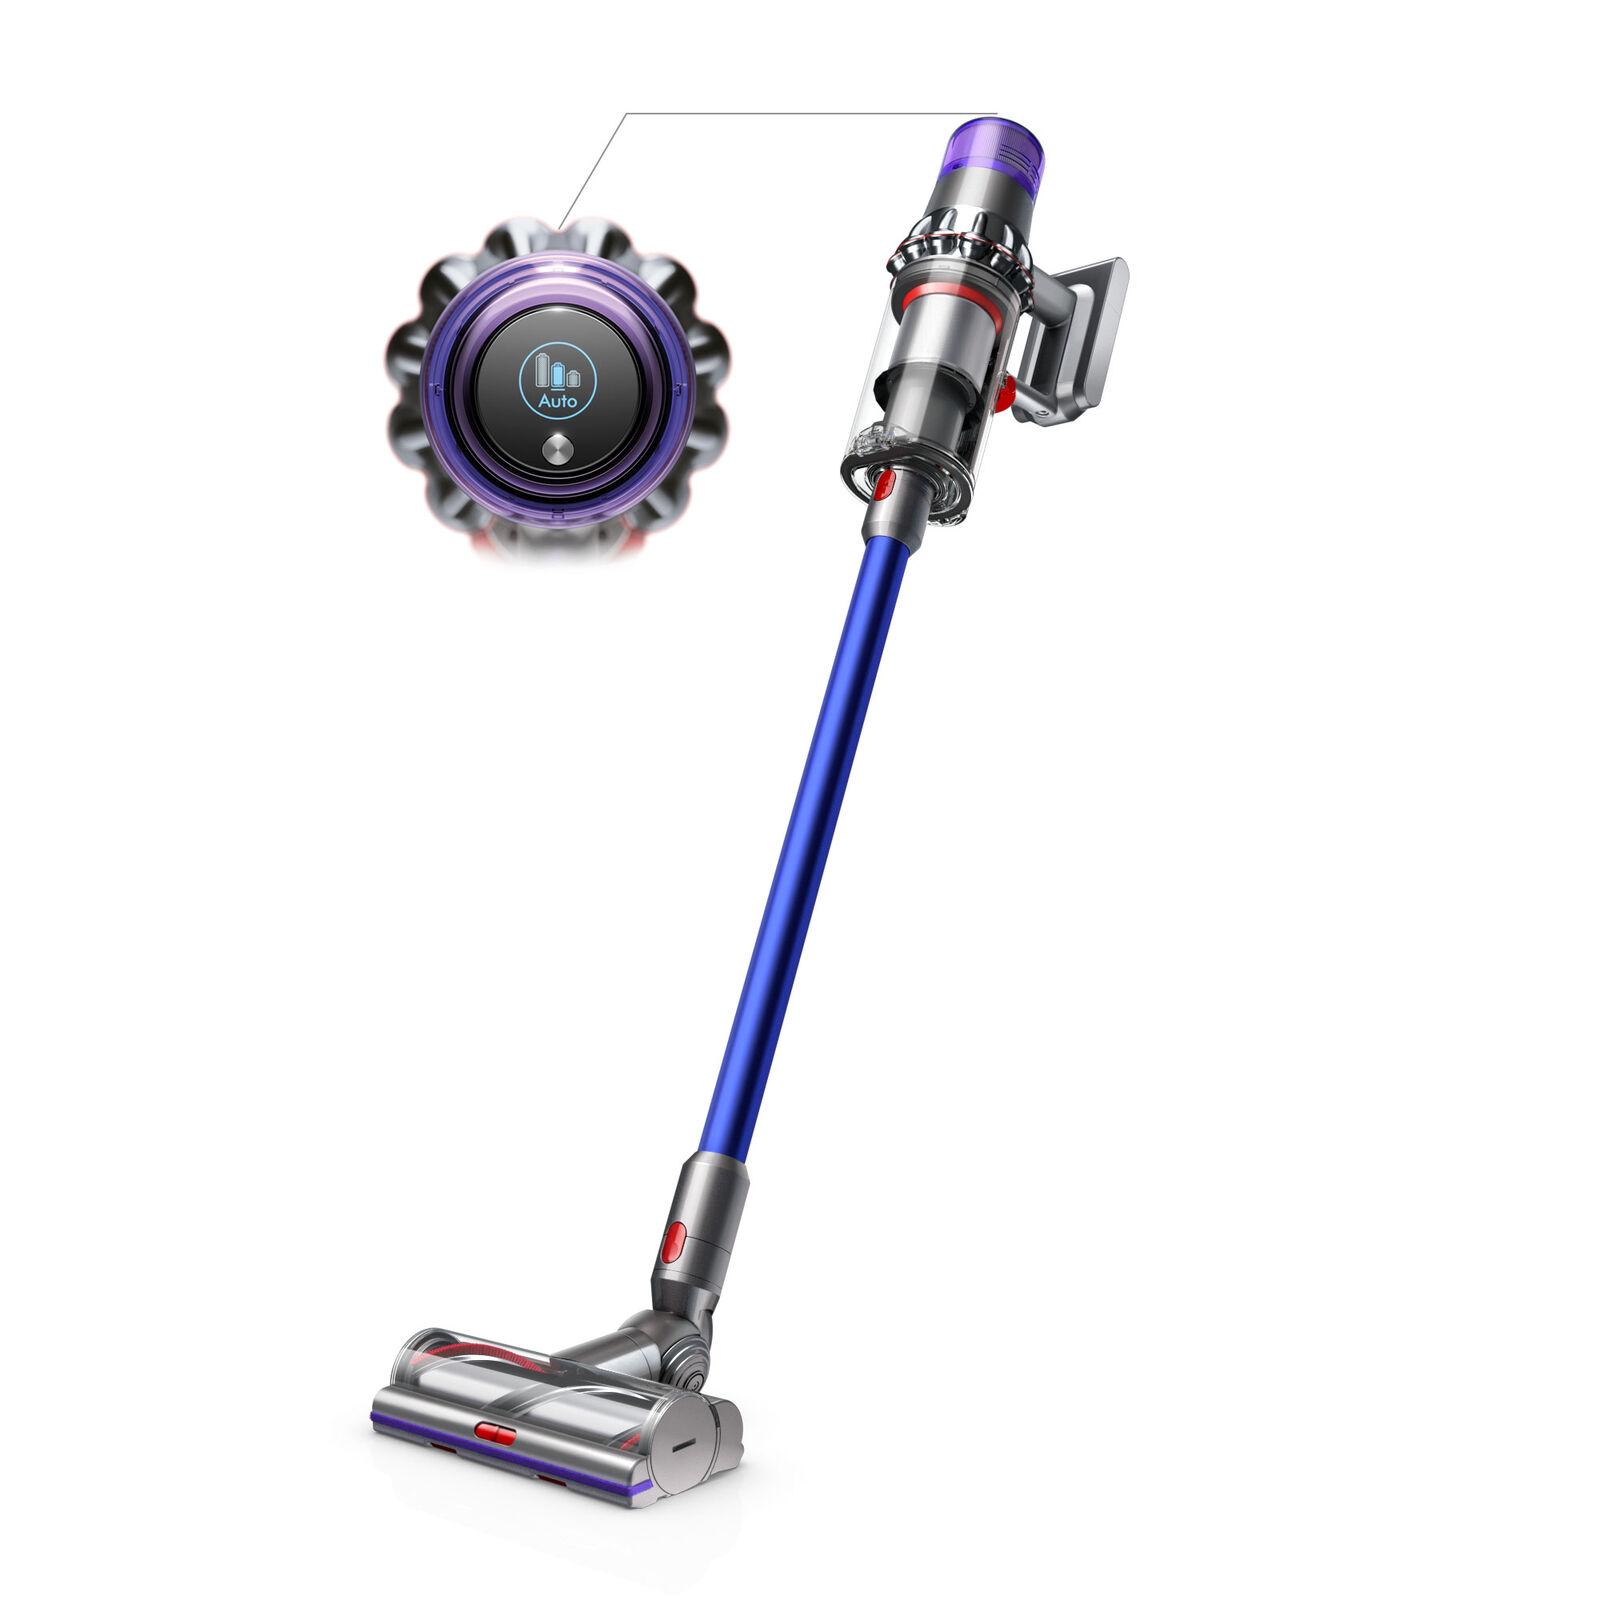 Dyson V11 Torque Drive Cordless Vacuum for $356.99 Shipped